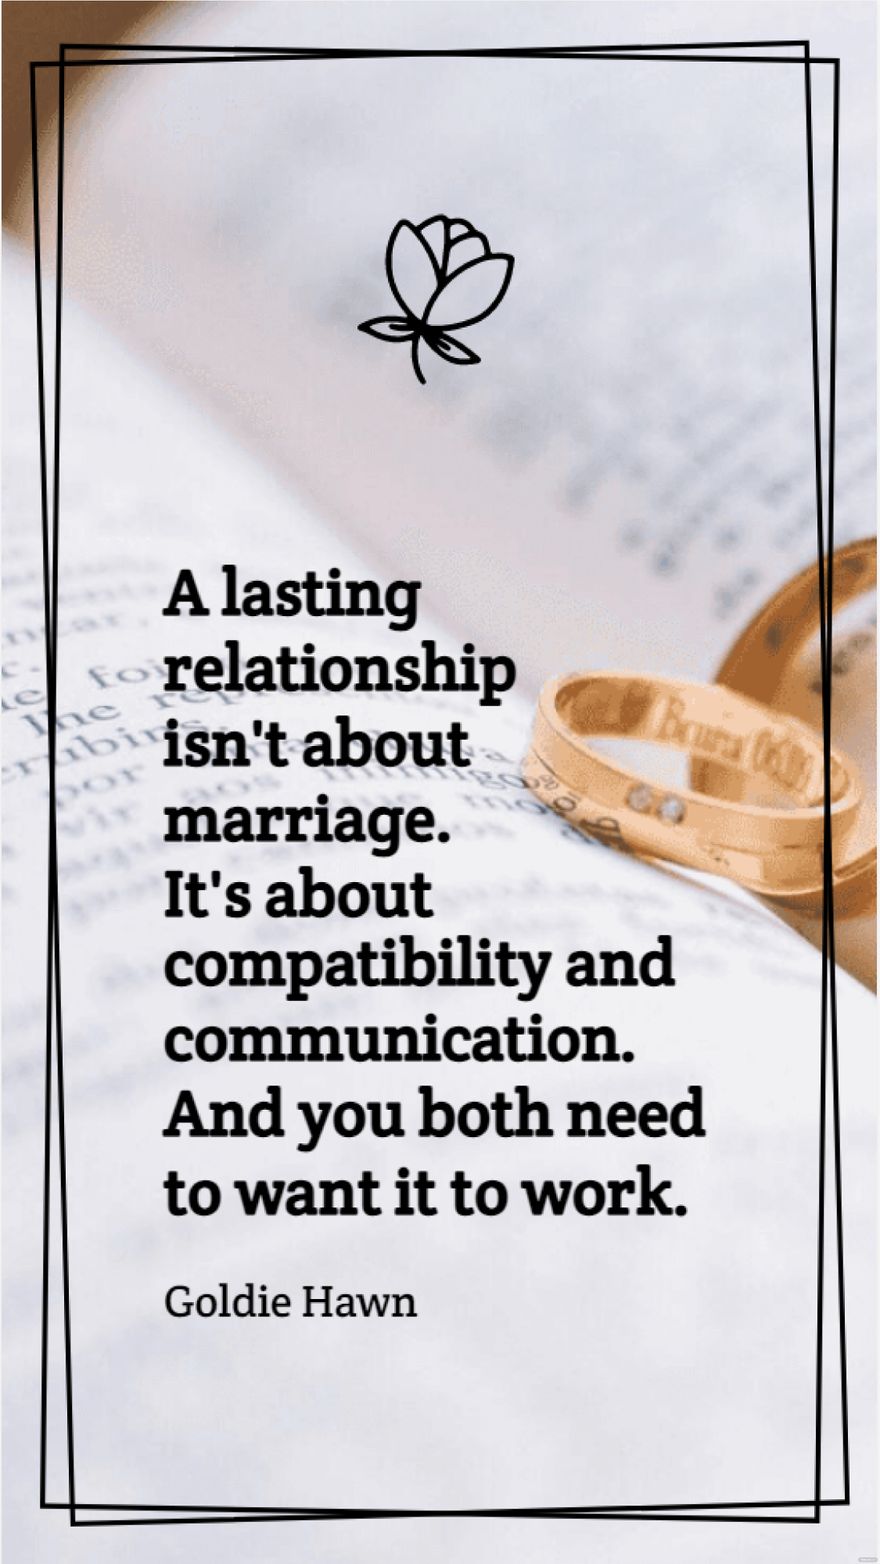 Goldie Hawn - A lasting relationship isn't about marriage. It's about compatibility and communication. And you both need to want it to work.